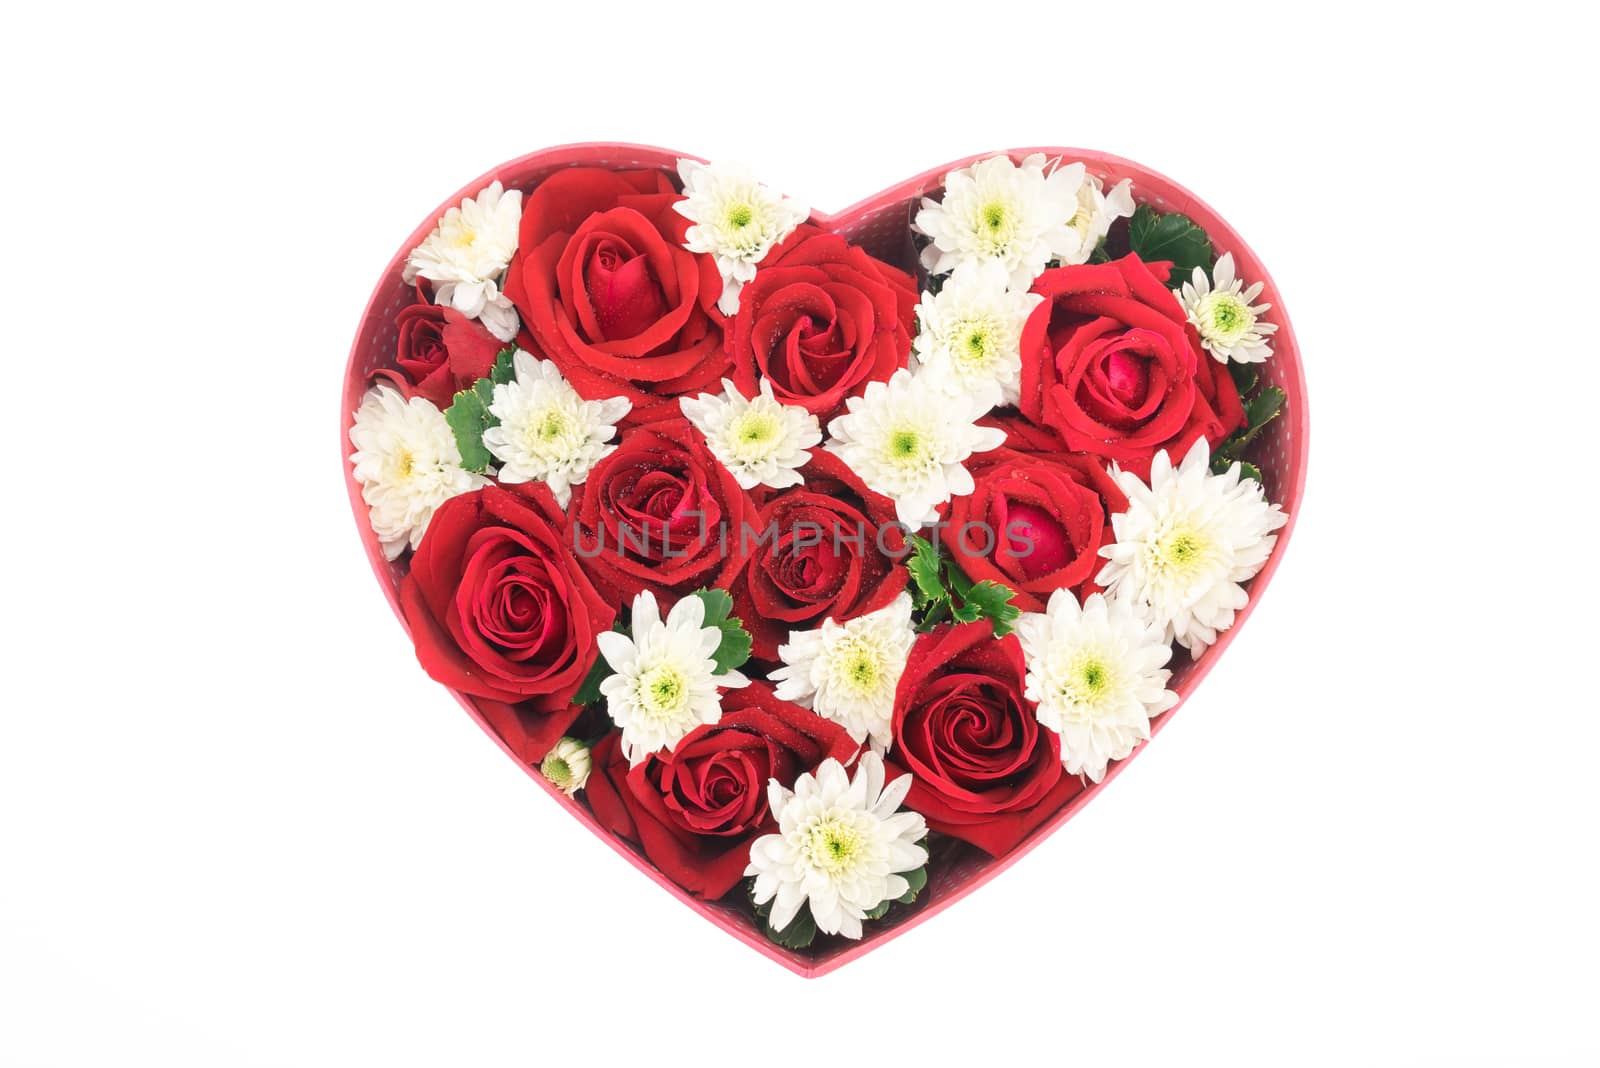 Roses and carnations held in the heart shape box. gift for valentine 's day, isolated on white background